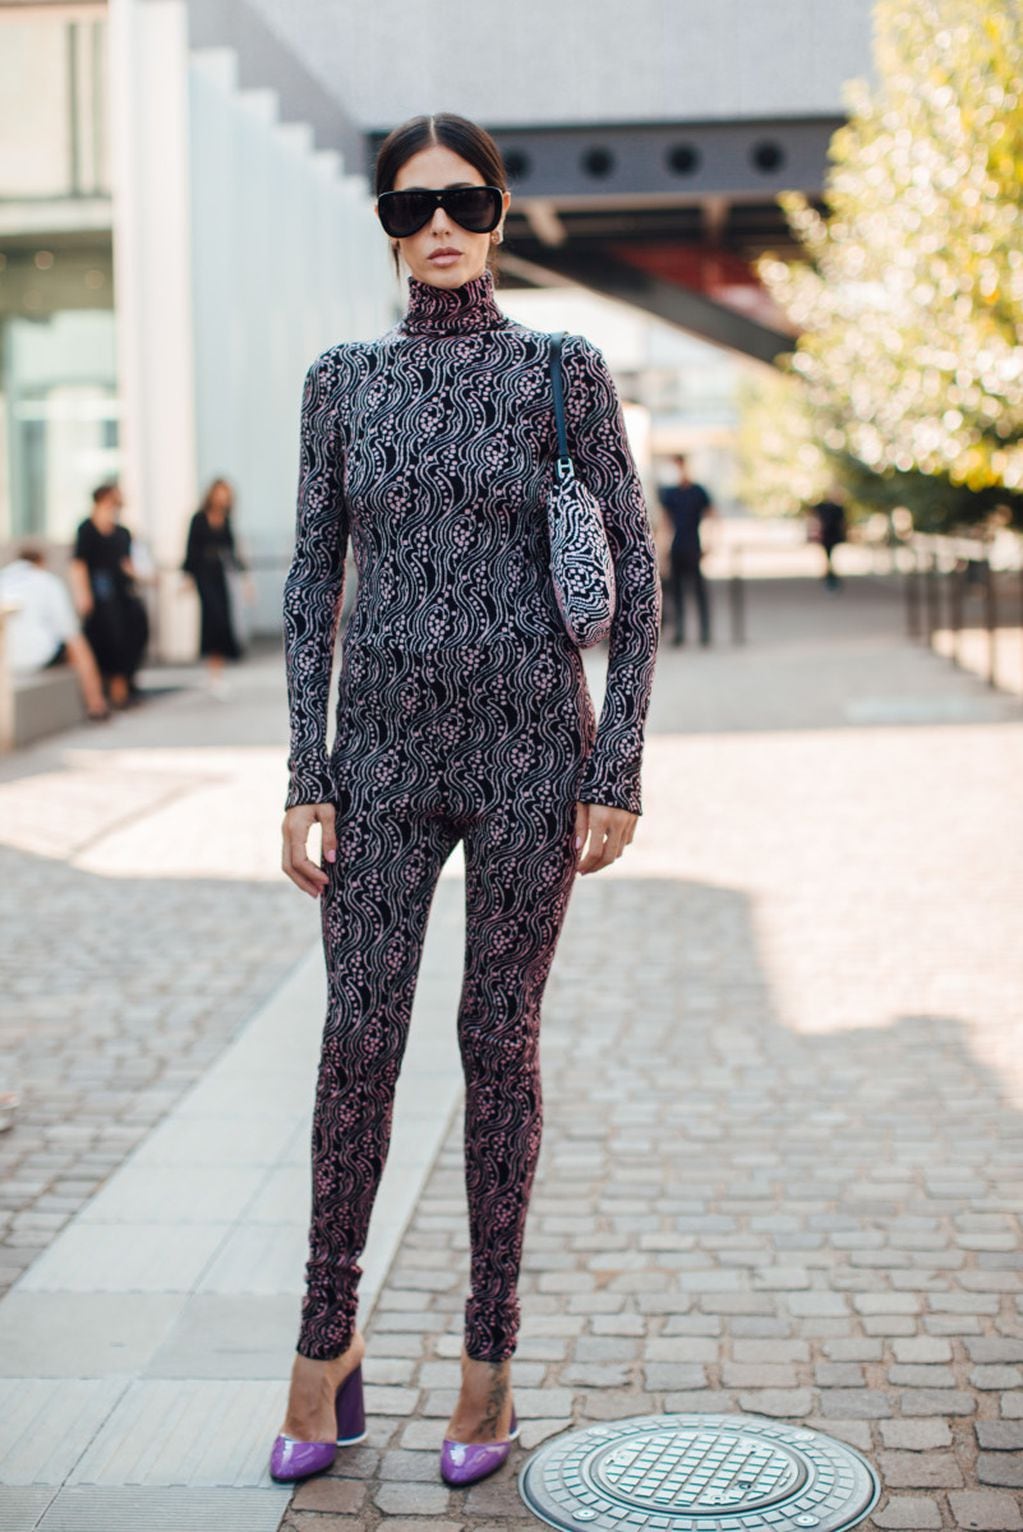 A showgoer in a Prada catsuit during Milan Fashion Week.
Photo: Imaxtree